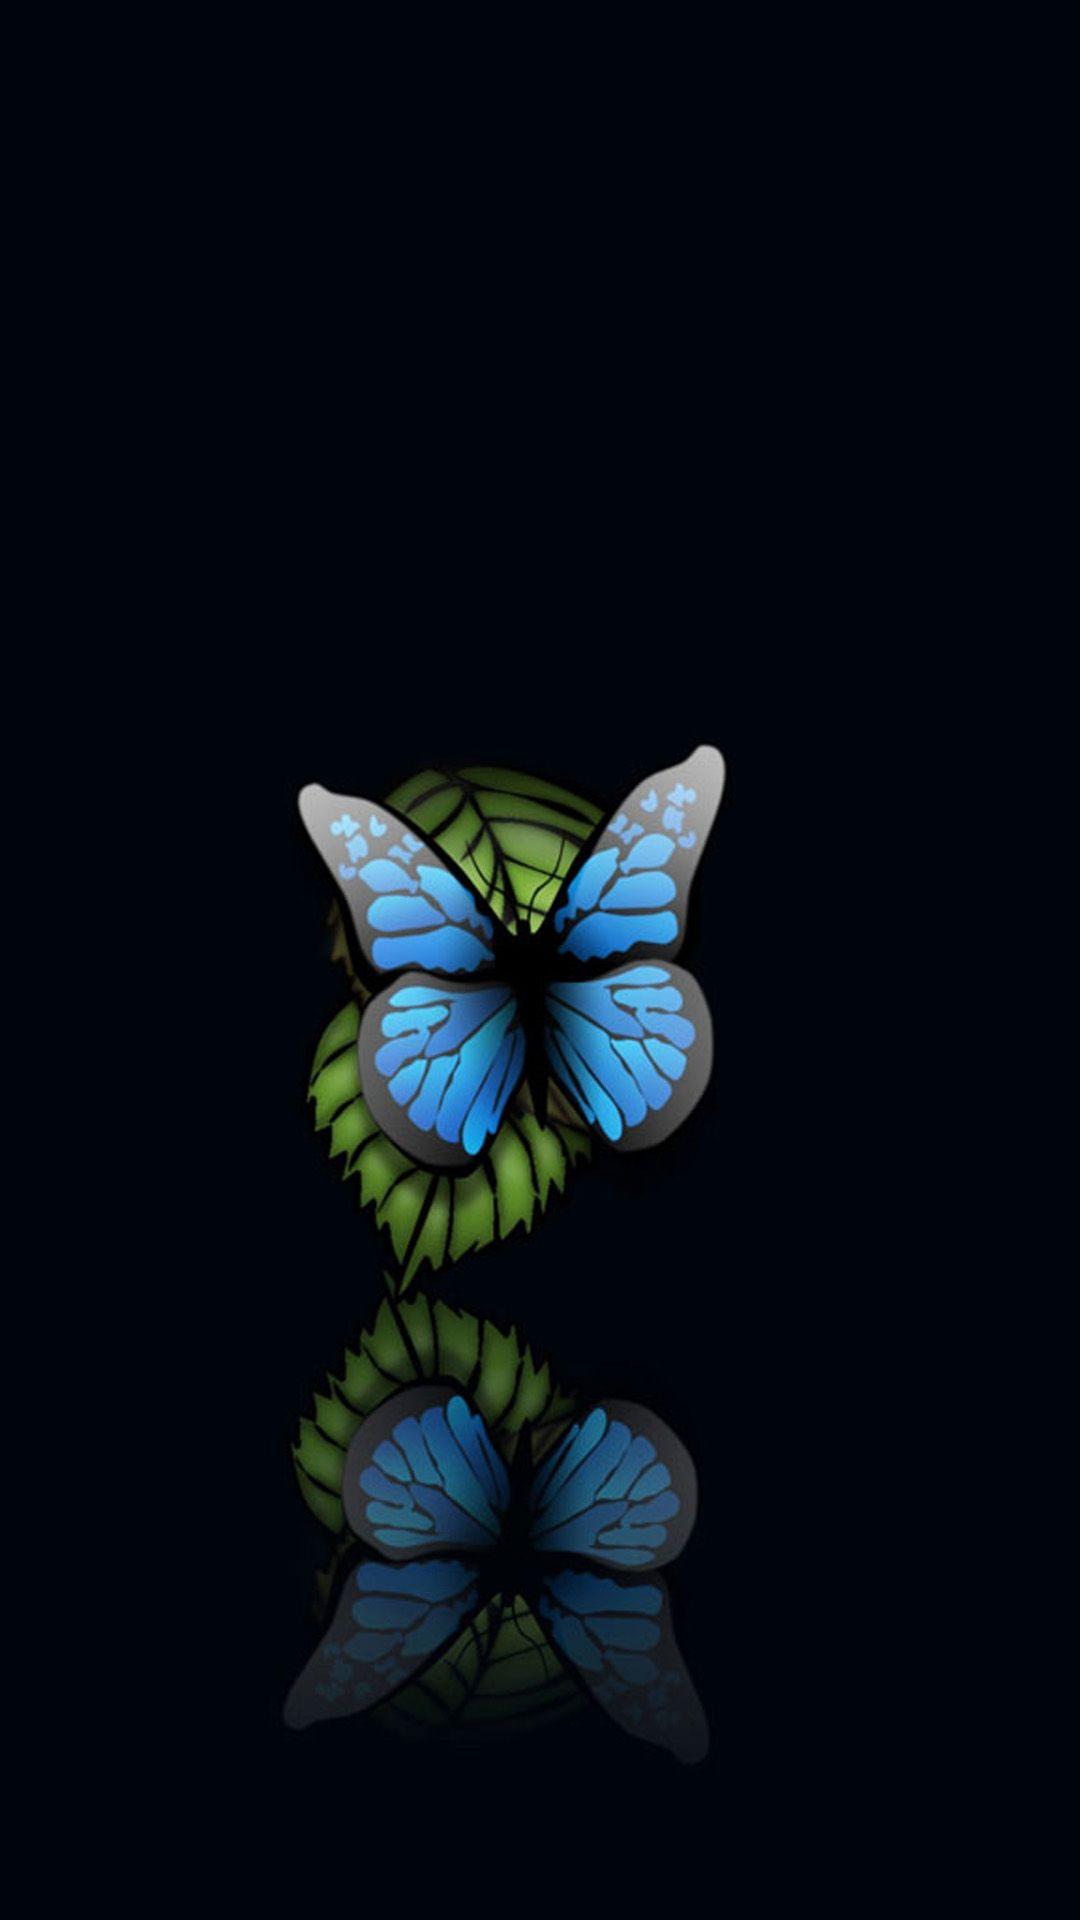 Blue Butterfly Black Background Android Wallpaper free download